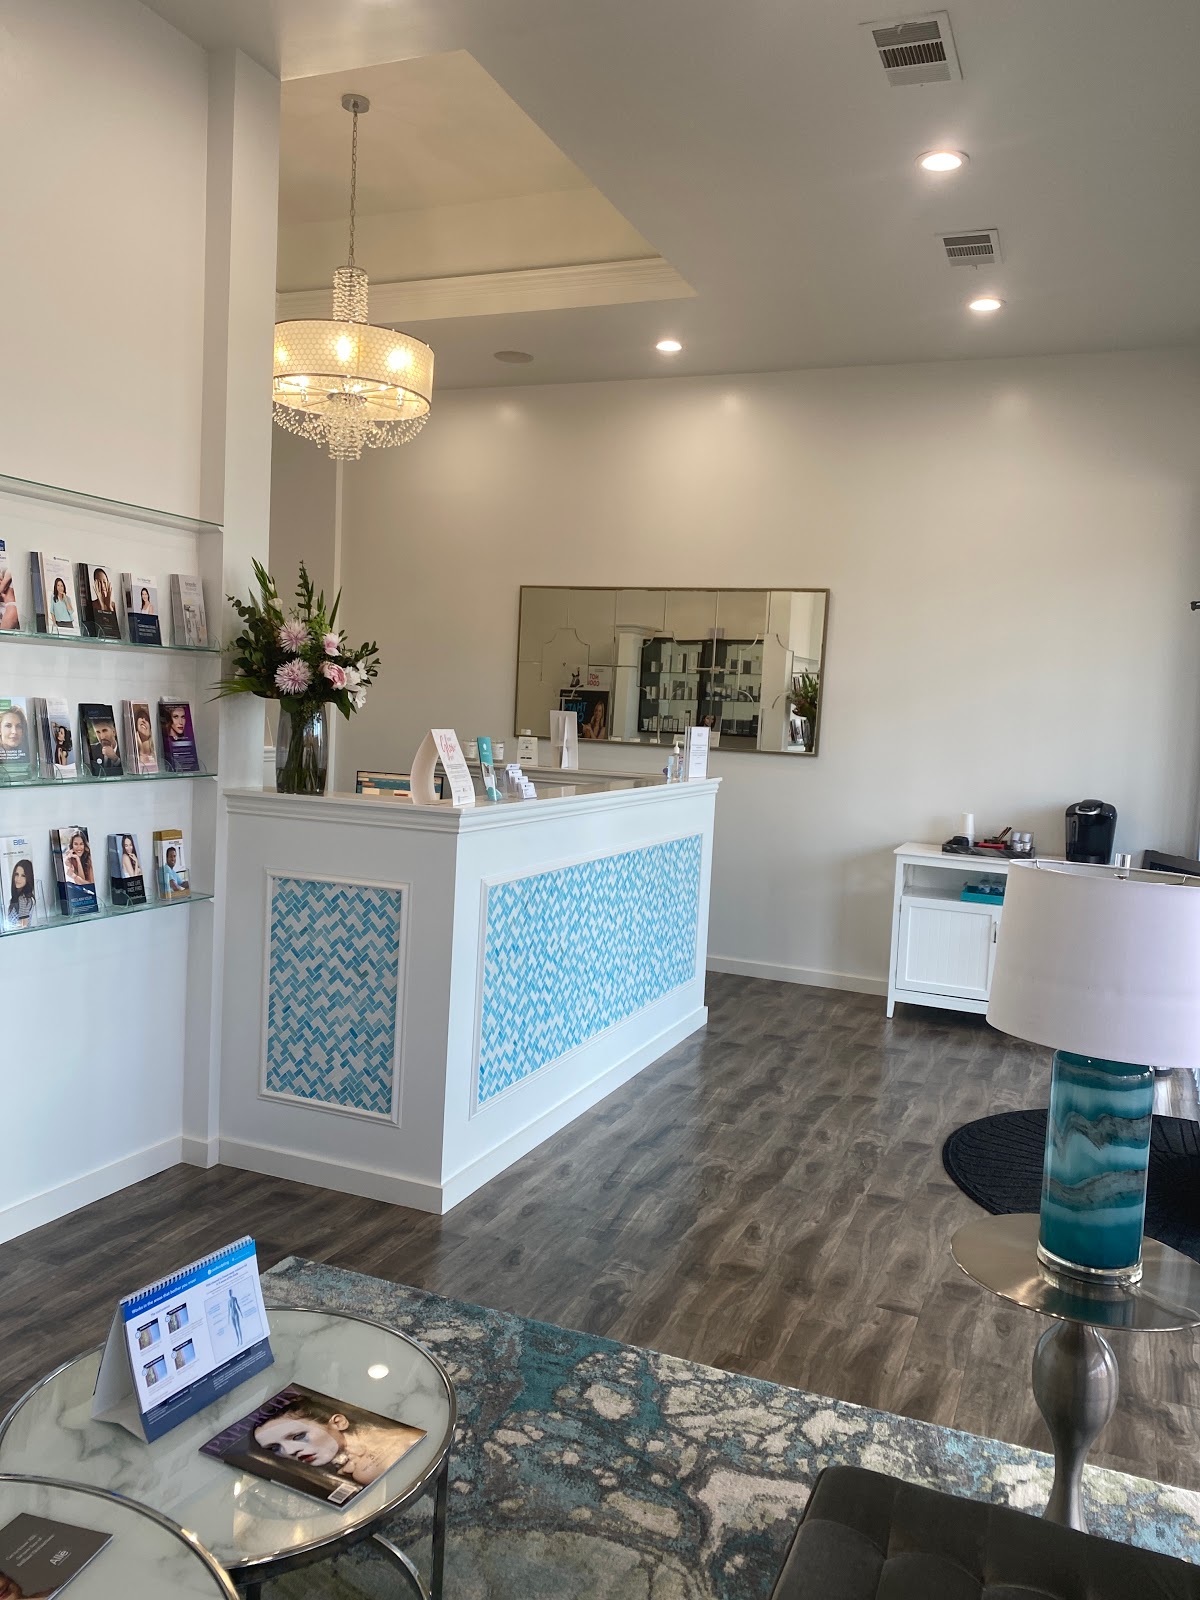 4.8 ⭐ Lily Med Spa Aesthetics & Laser Center Reviews by Real Customers 2023